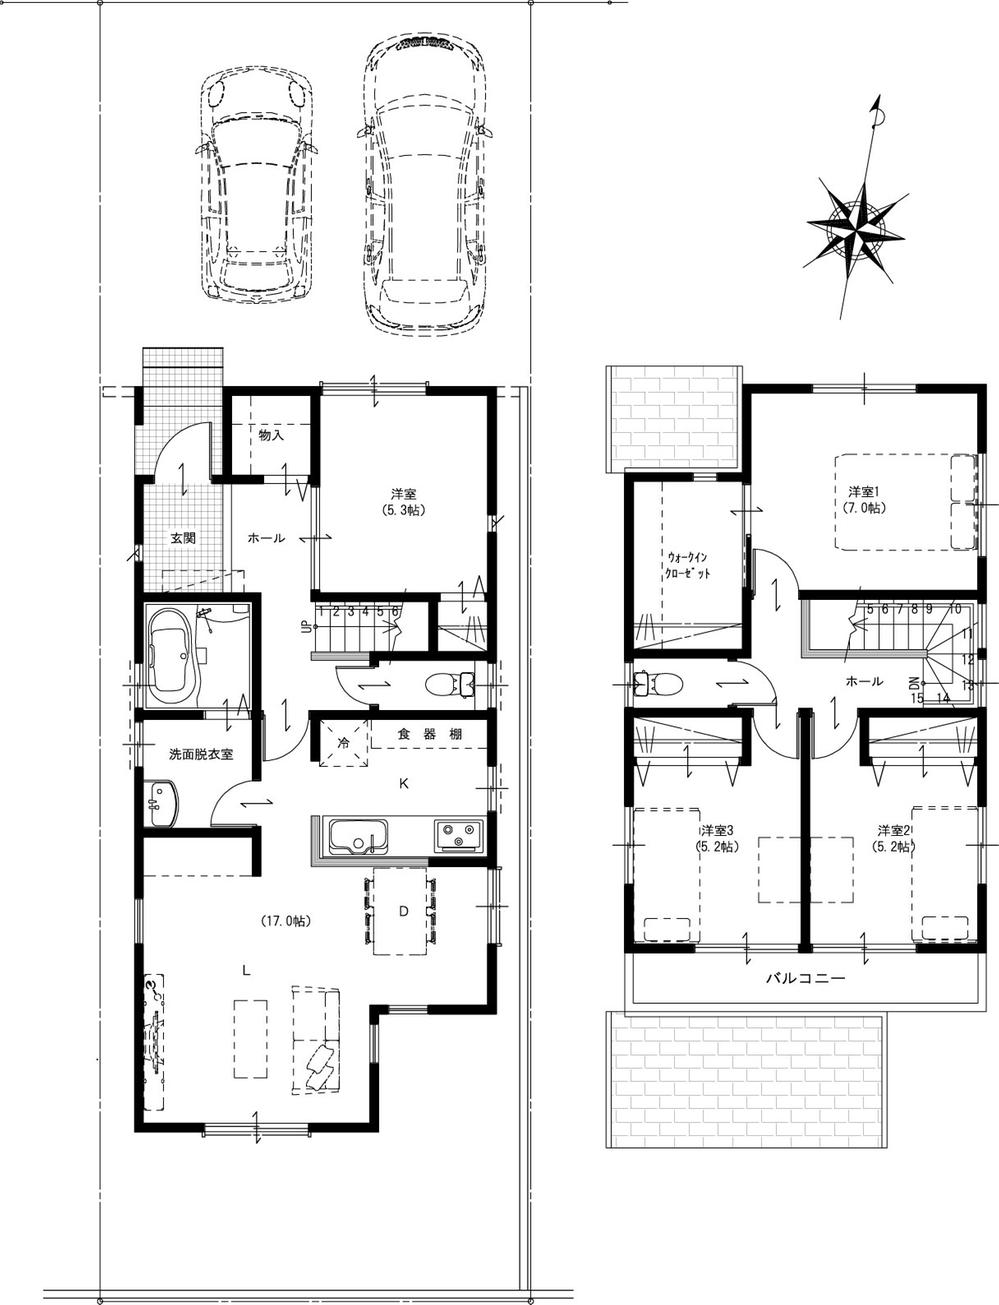 Other building plan example. Building plan example (D compartment) Building price 14.8 million yen (tax included), Building area 108.09 sq m